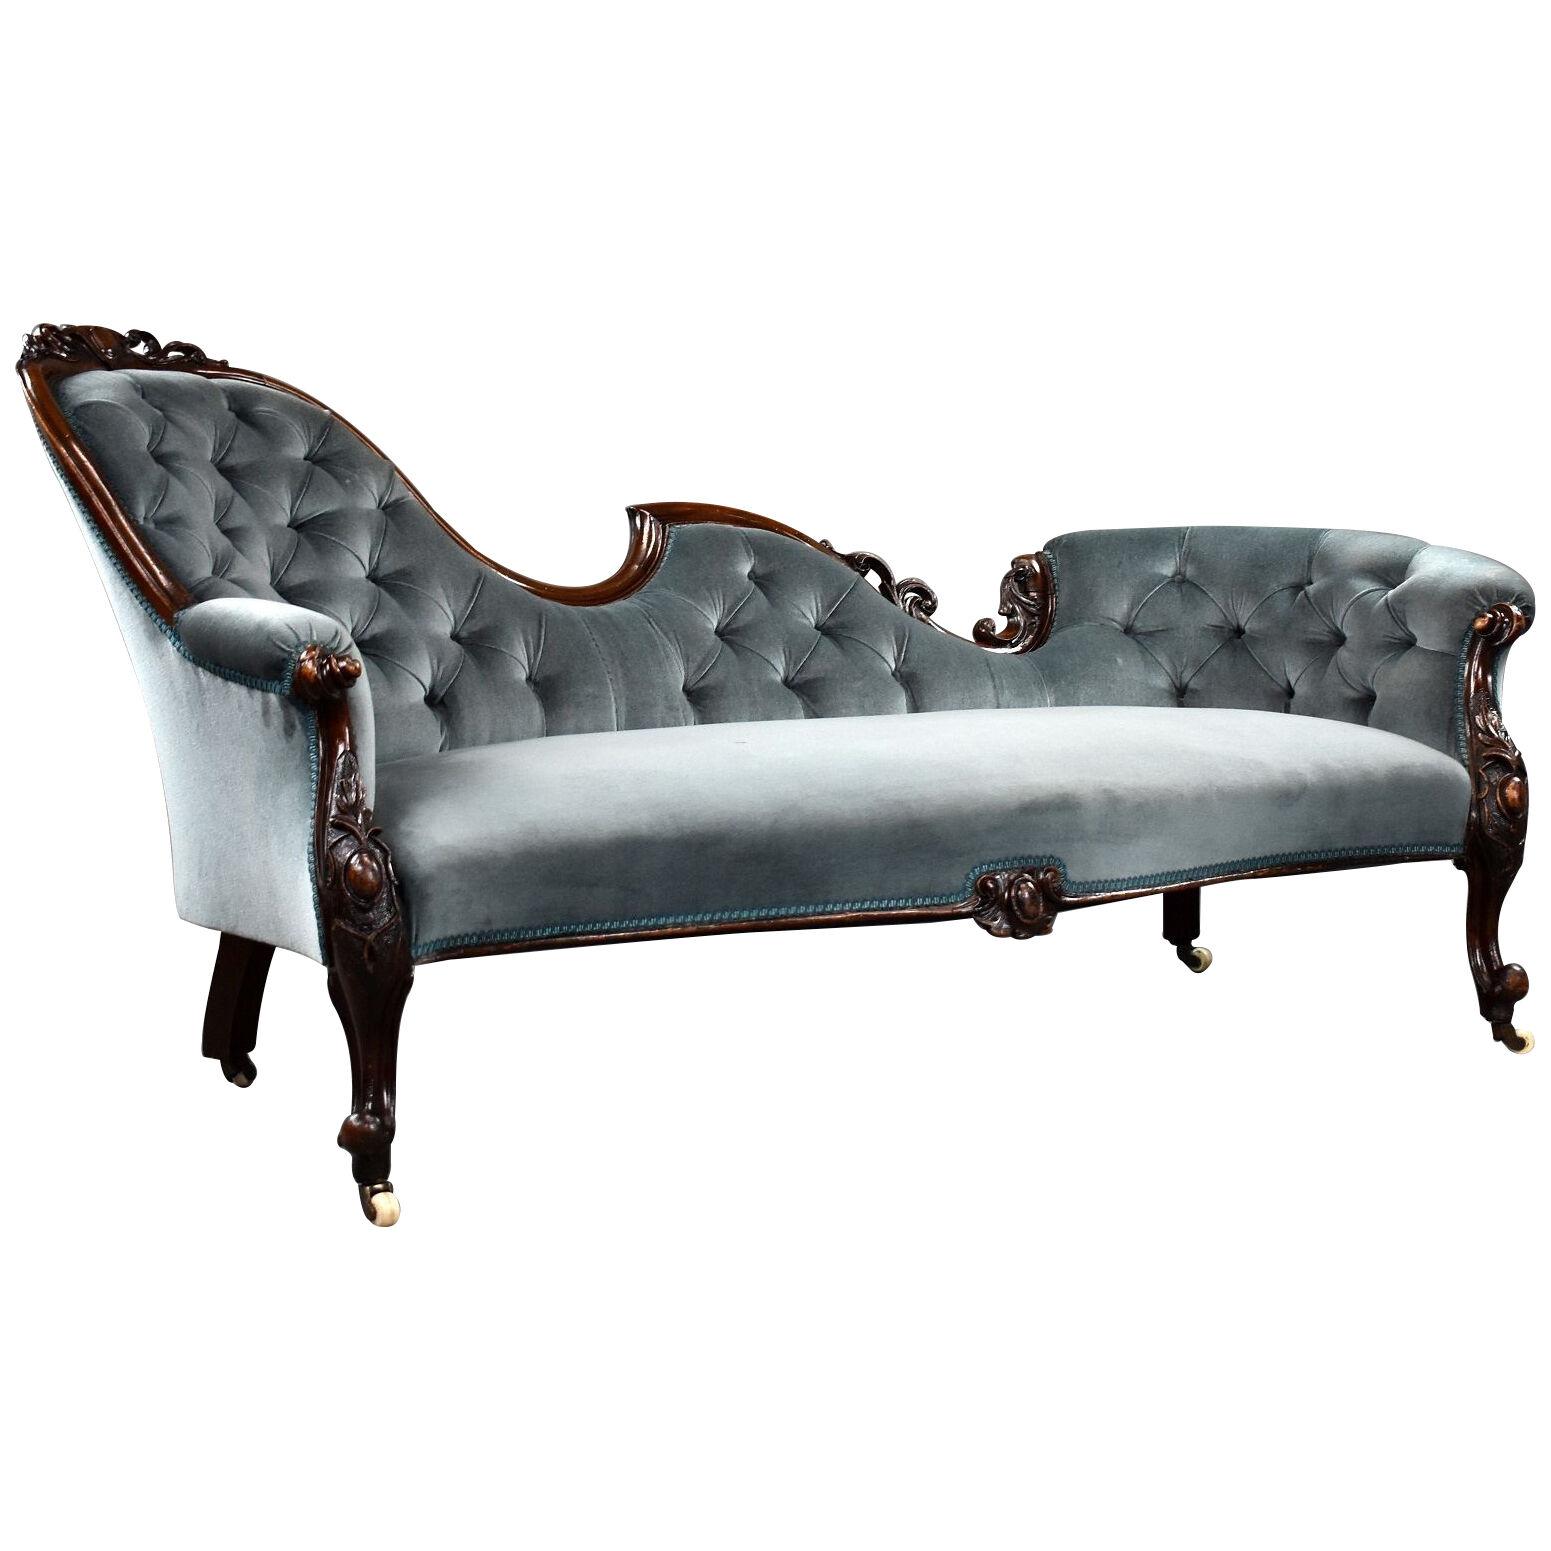 Victorian Mahogany Carved Chaise Lounge